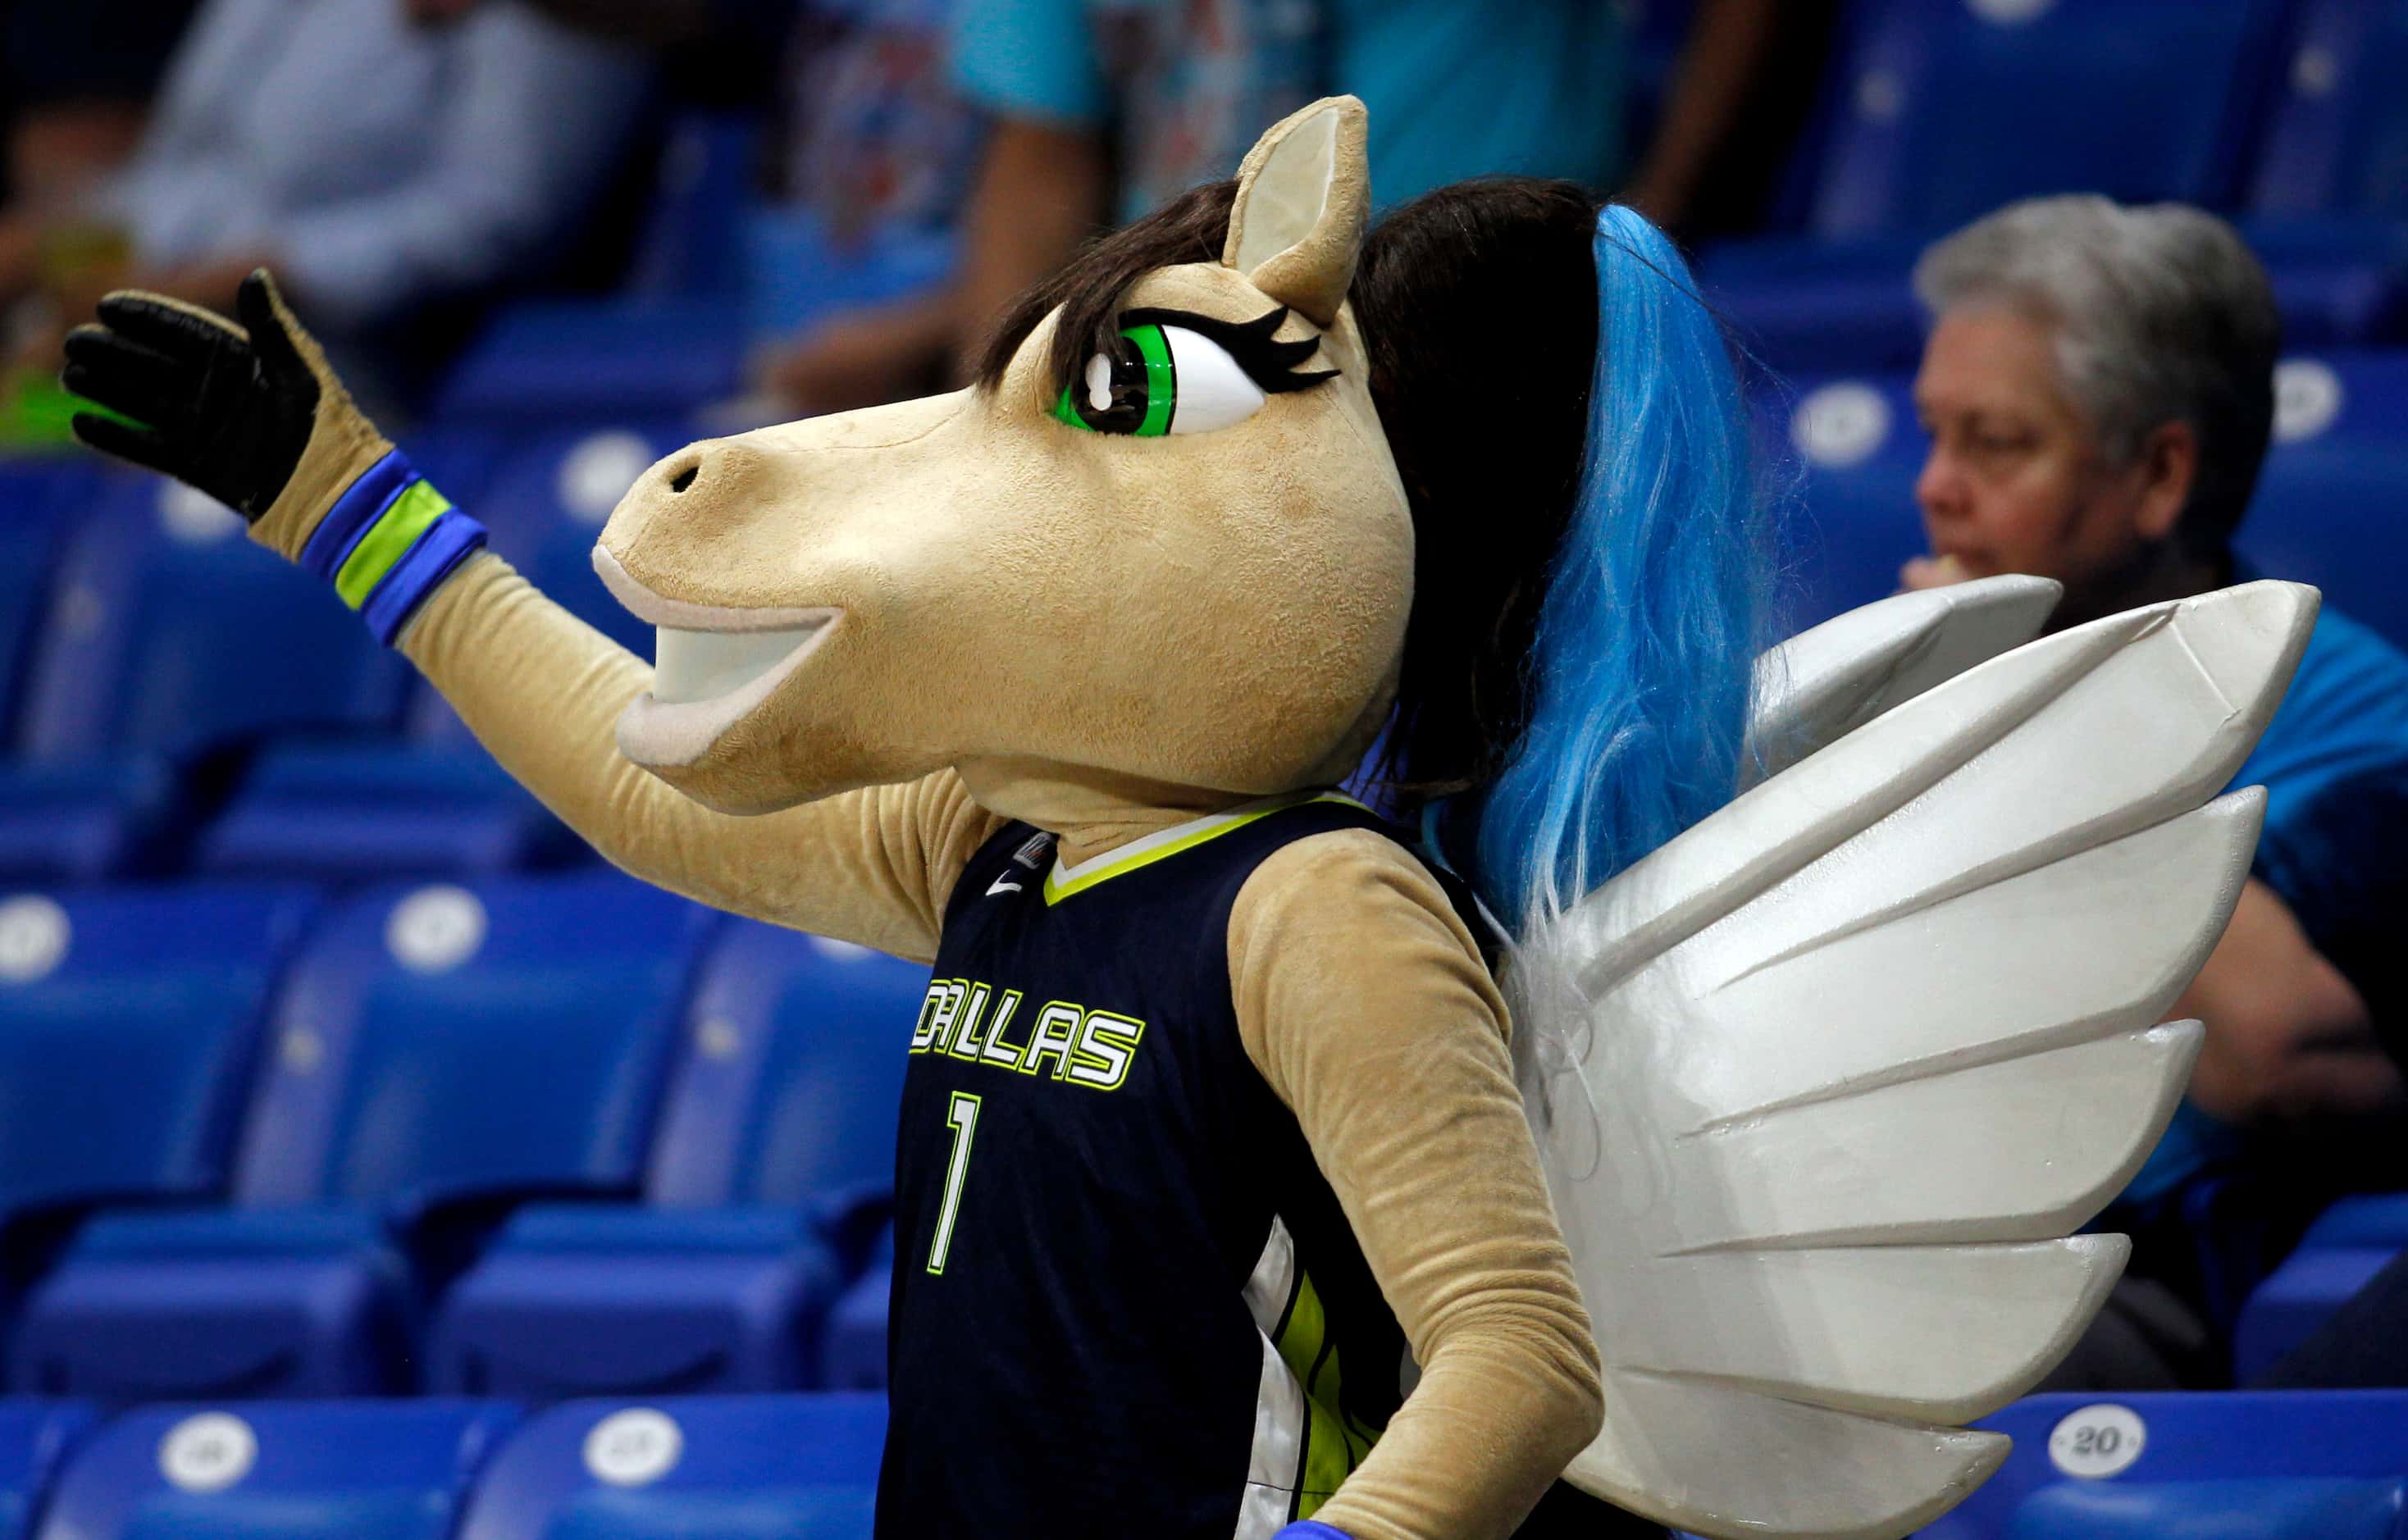 Dallas Wings mascot "Lightning" works to energize fans just prior to the opening tip between...